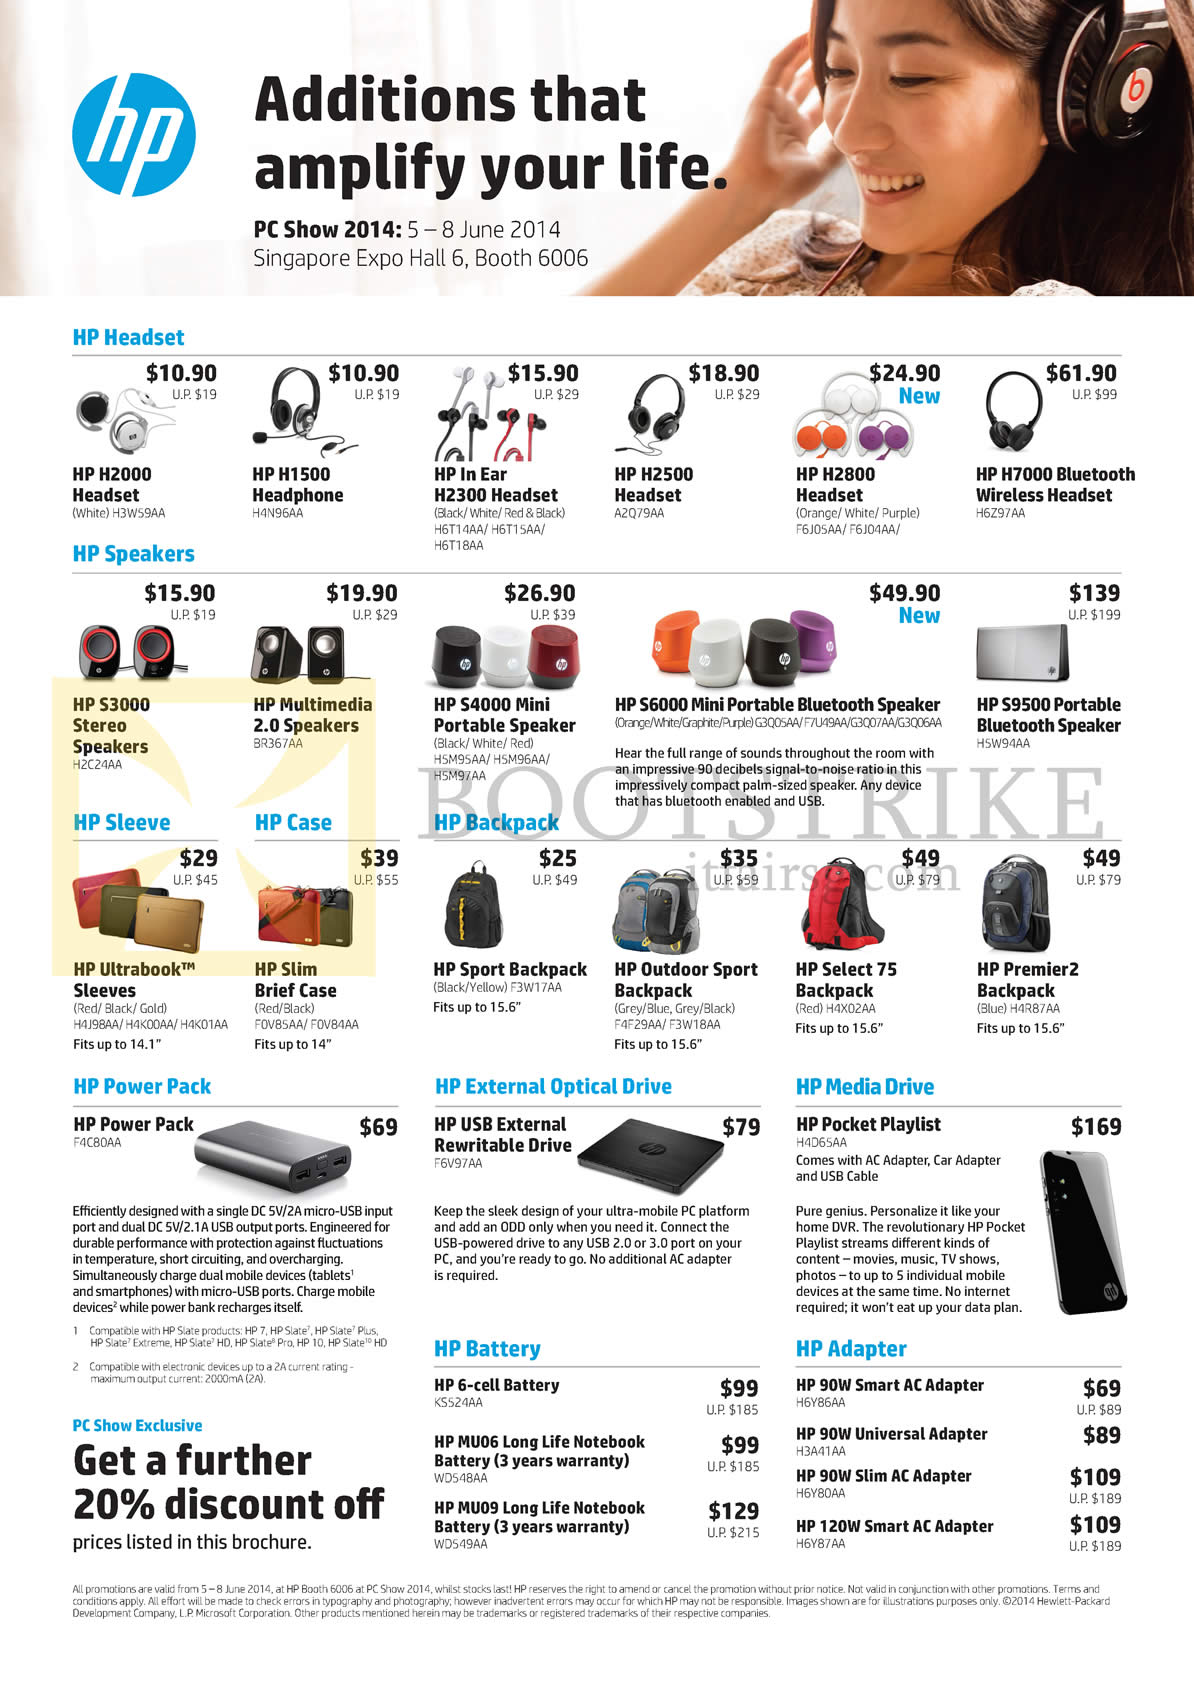 PC SHOW 2014 price list image brochure of HP Headsets, Speakers, Sleeve, Case, Backpacks, Batteries, Adapters, H2000, H1500, H2300, H7000, S3000, S6000, S9500